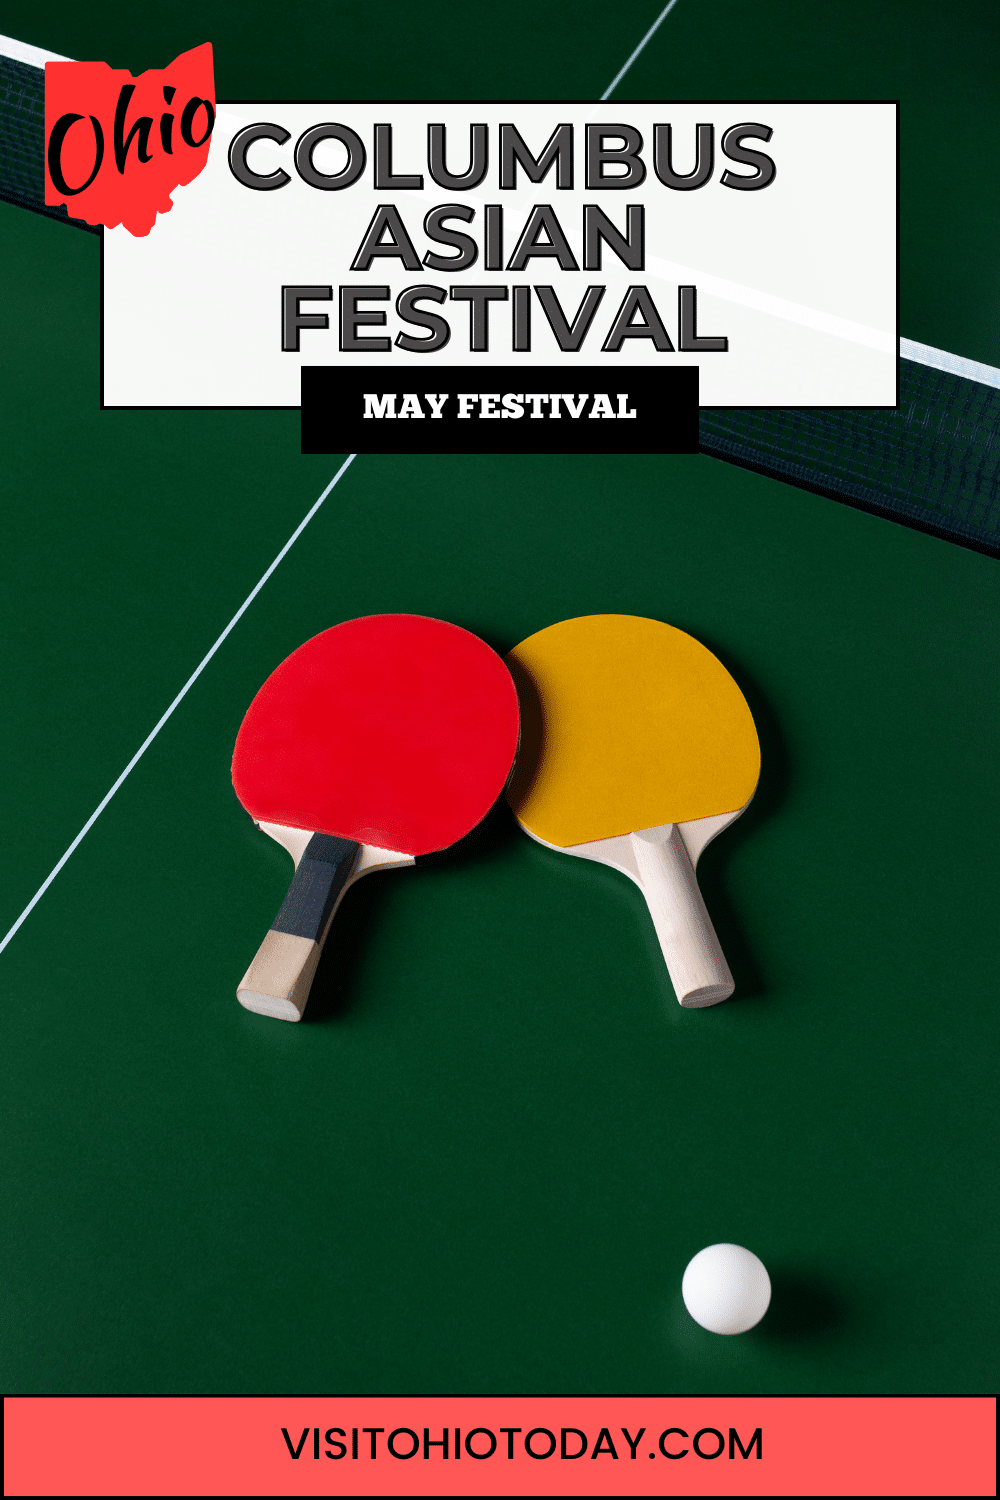 A vertical image for Pinterest of a photo of two ping pong paddles and a ping pong ball, sitting on a ping pong table. A white block at the top has text Columbus Asian Festival, with the red and black VisitOhioToday logo. A black block underneath has text May Festival. A red strip across the bottom has text VisitOhioToday. com